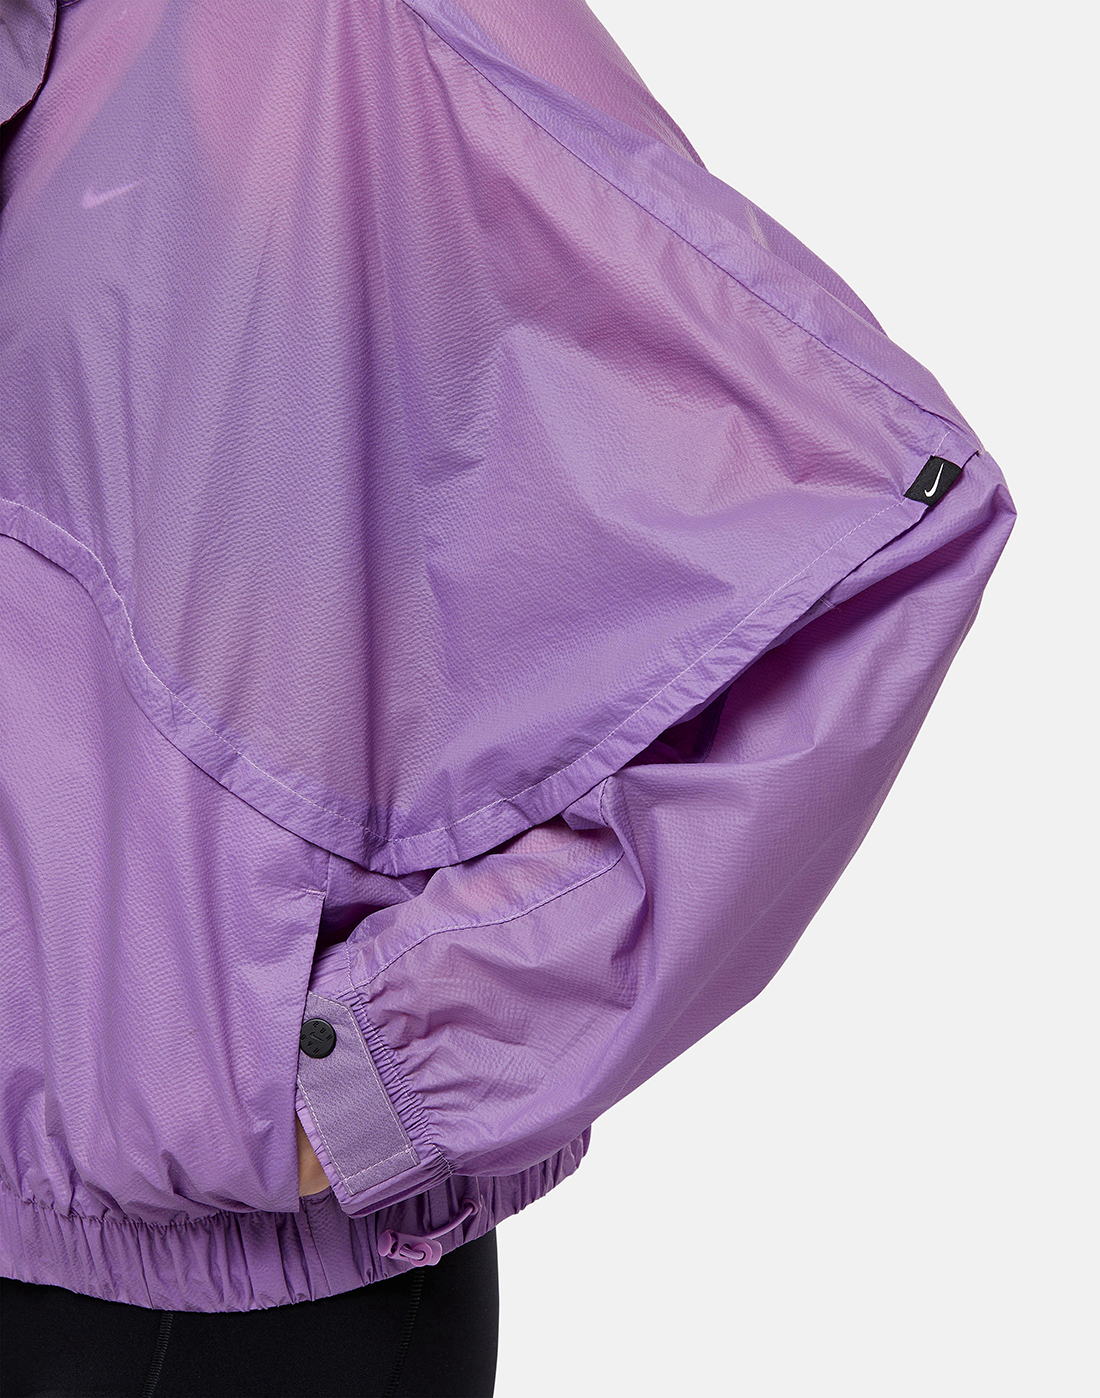 Nike Womens Run Division Reflective Jacket - Purple | Life Style Sports IE